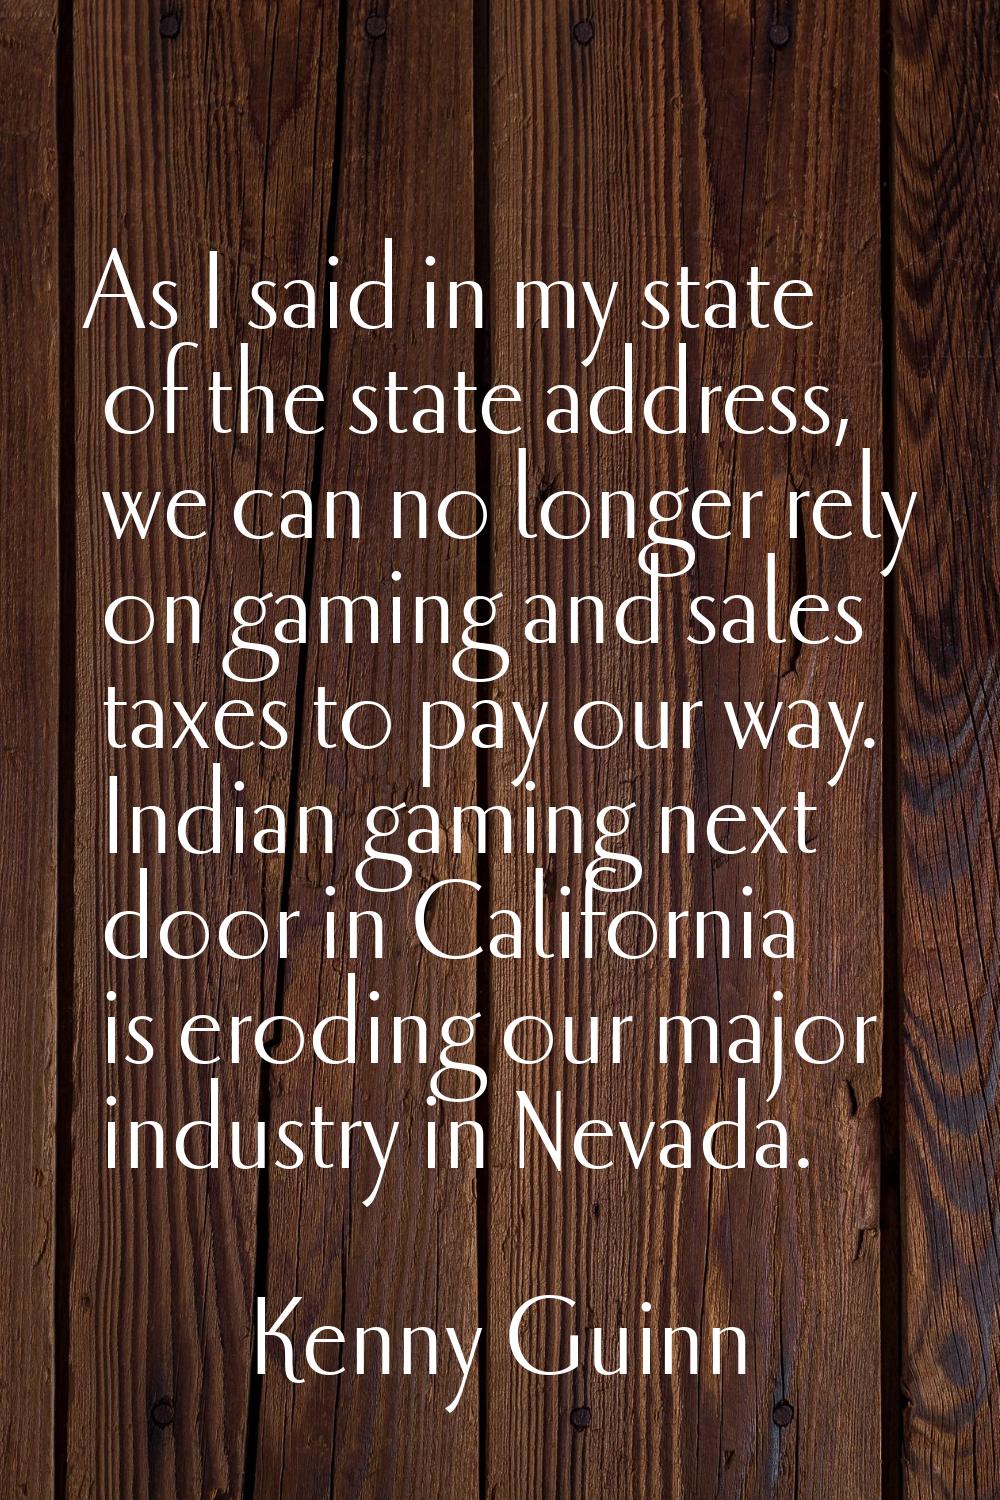 As I said in my state of the state address, we can no longer rely on gaming and sales taxes to pay 